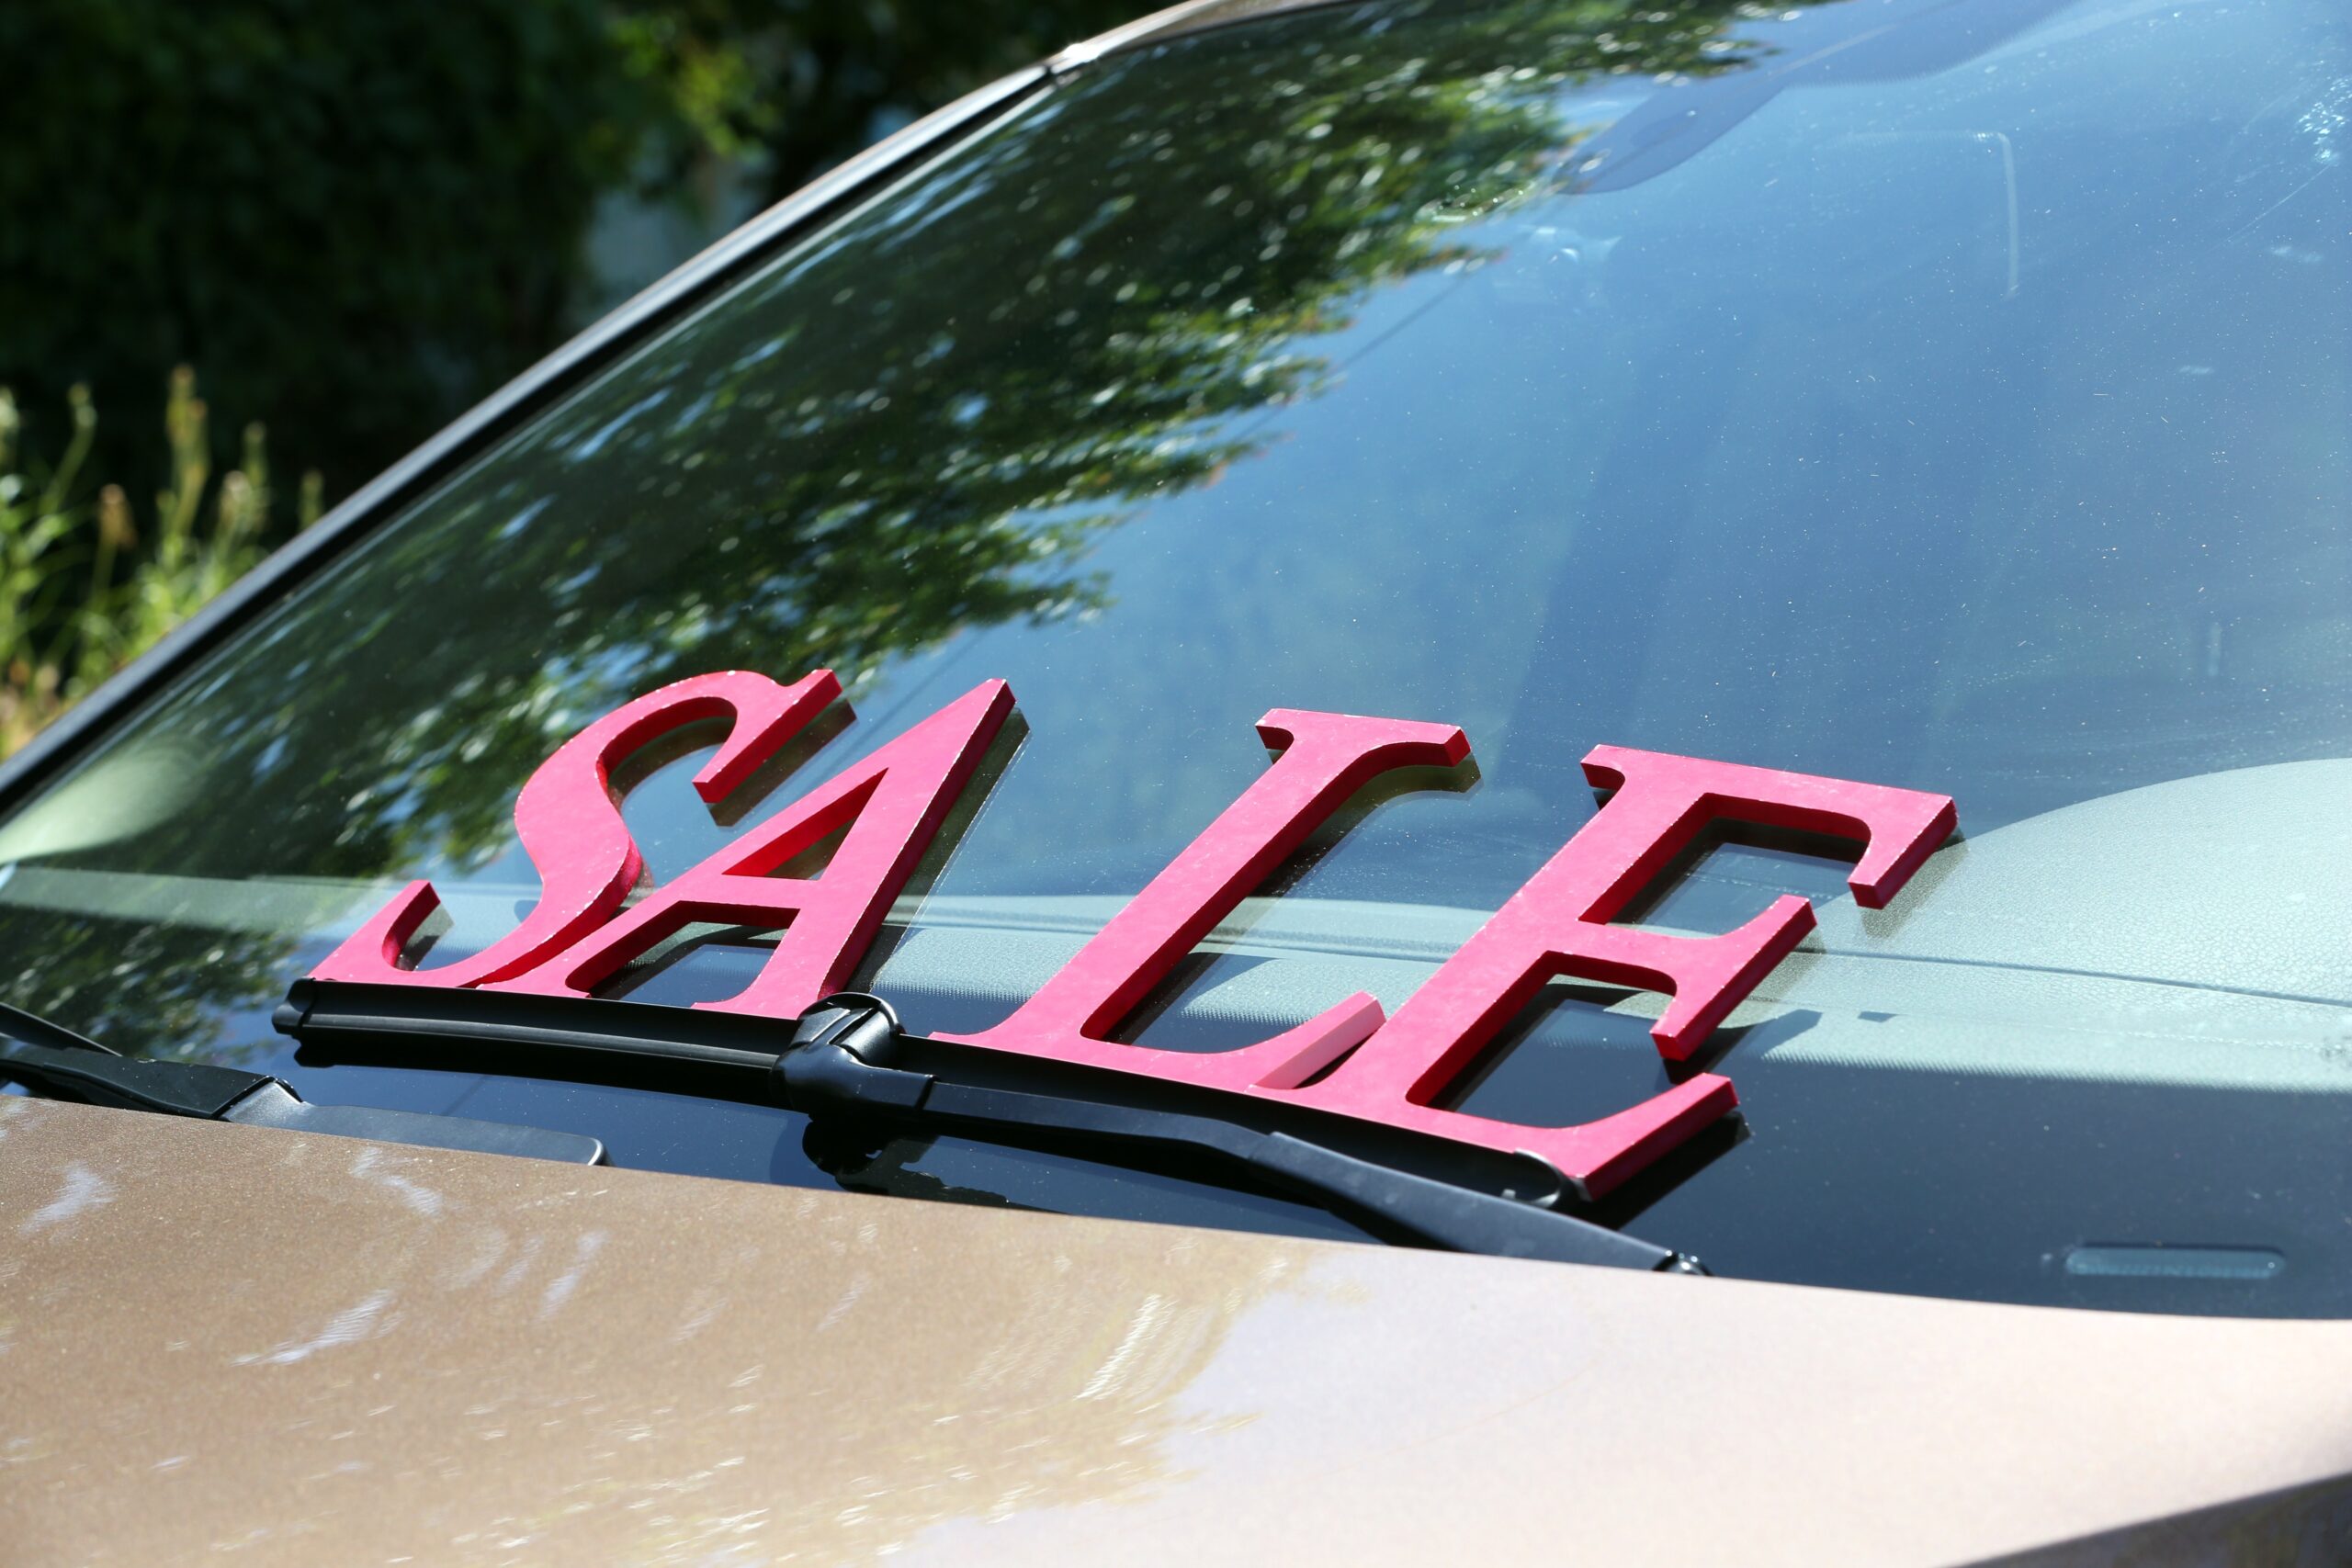 Do I Need A Dealer License To Sell Cars?